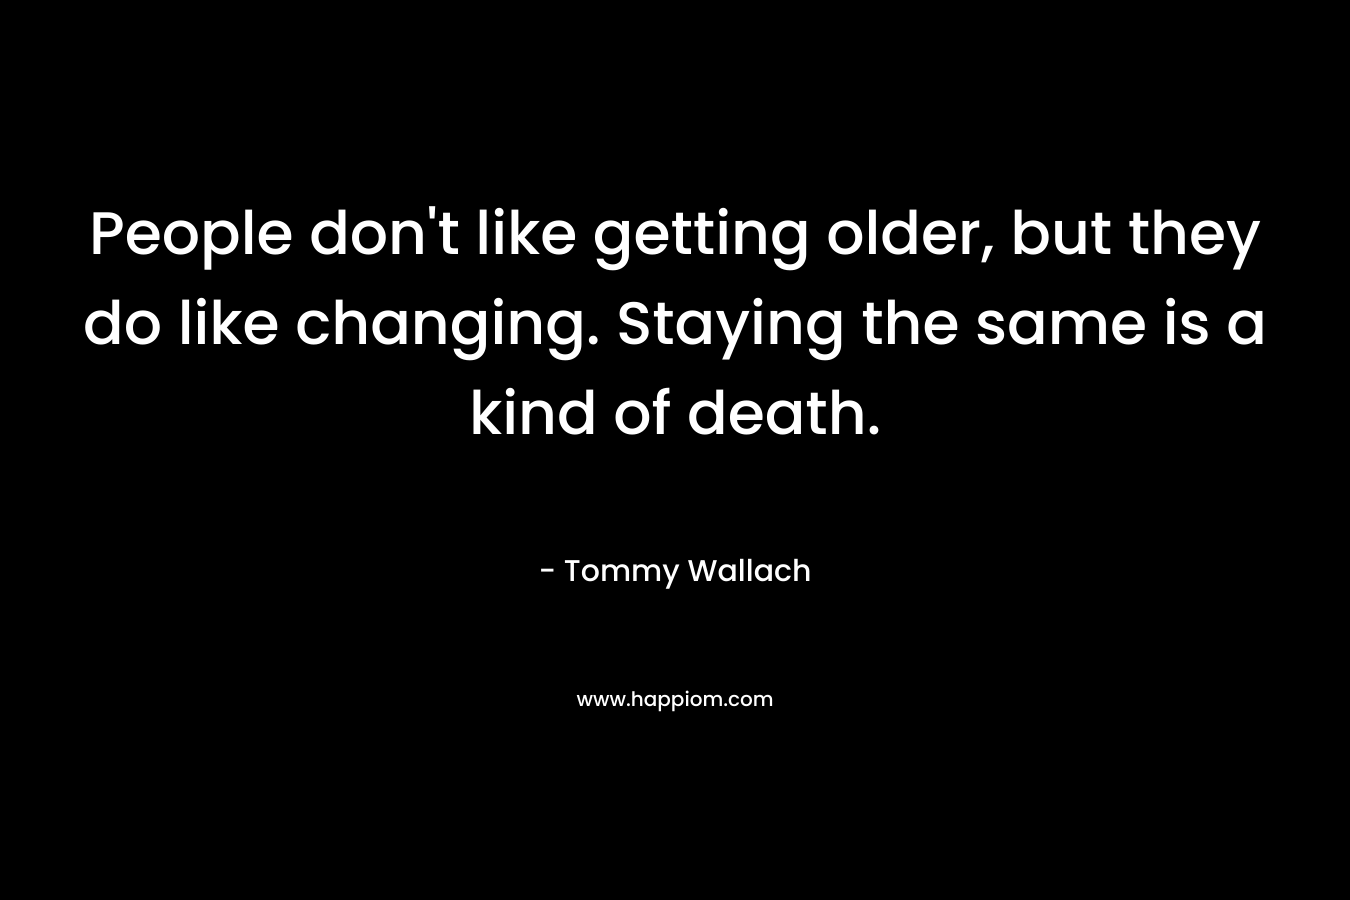 People don’t like getting older, but they do like changing. Staying the same is a kind of death. – Tommy Wallach